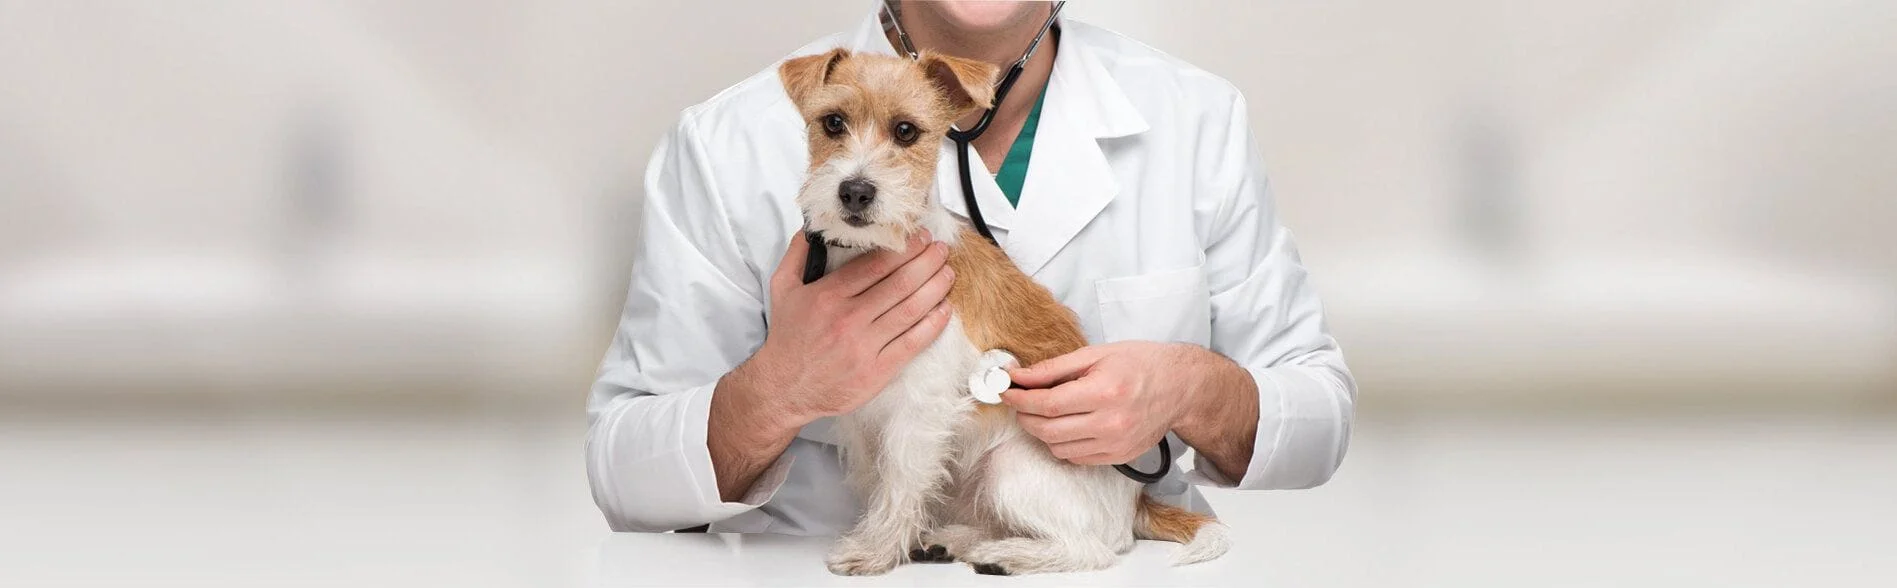 Vet with dog 